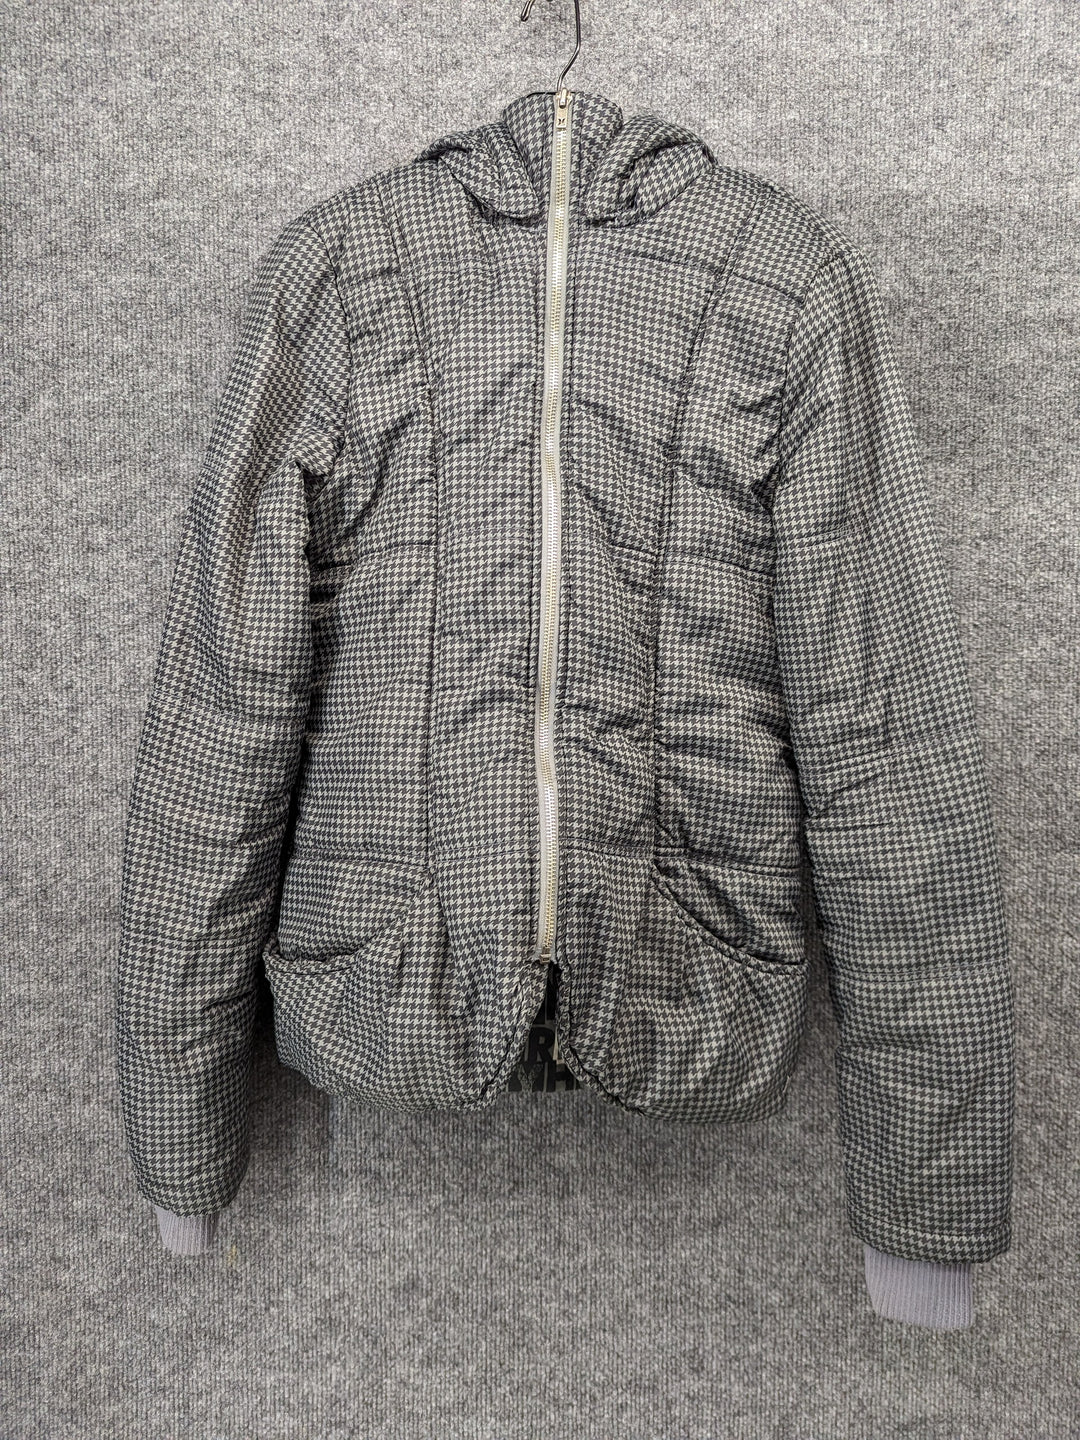 Hurley Size Y Large Youth Synthetic Jacket